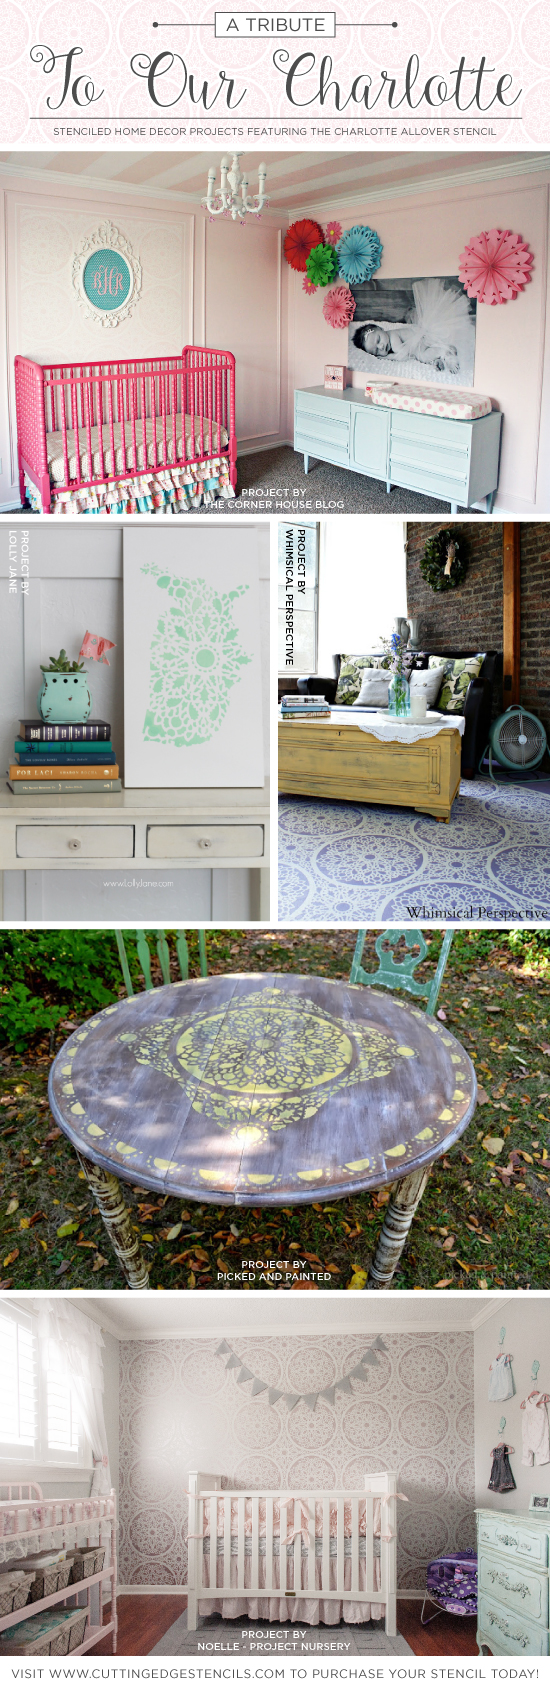 Cutting Edge Stencils shares DIY stencil projects using the lace-like Charlotte Allover Stencil. http://www.cuttingedgestencils.com/charlotte-allover-stencil-pattern.html